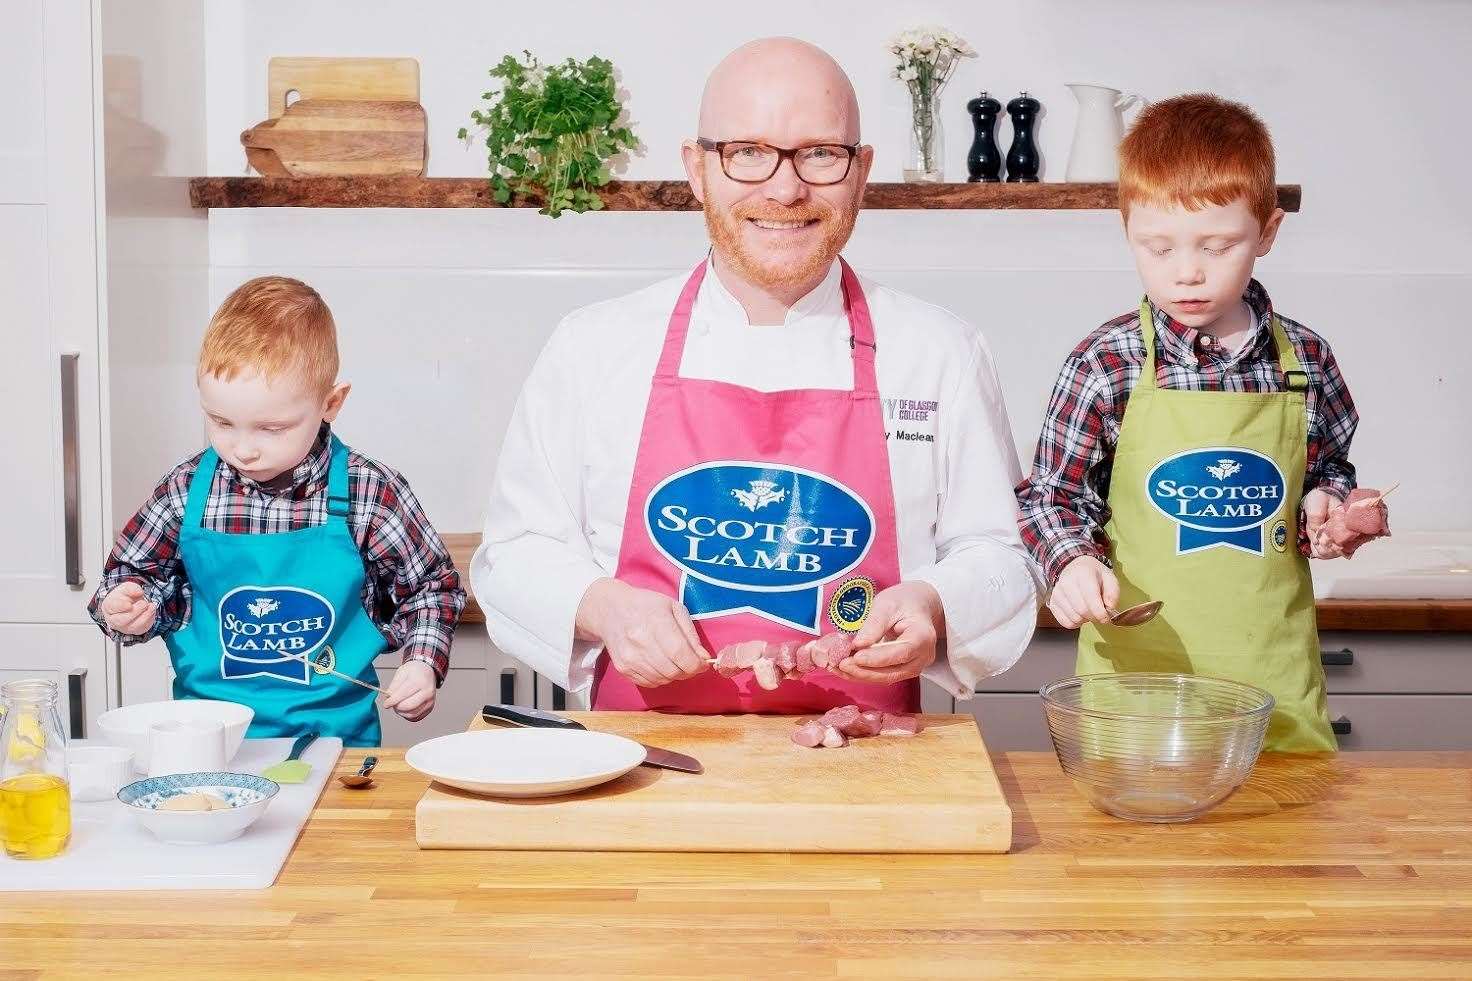 The Scotch Kitchen are encouraging kids to cook